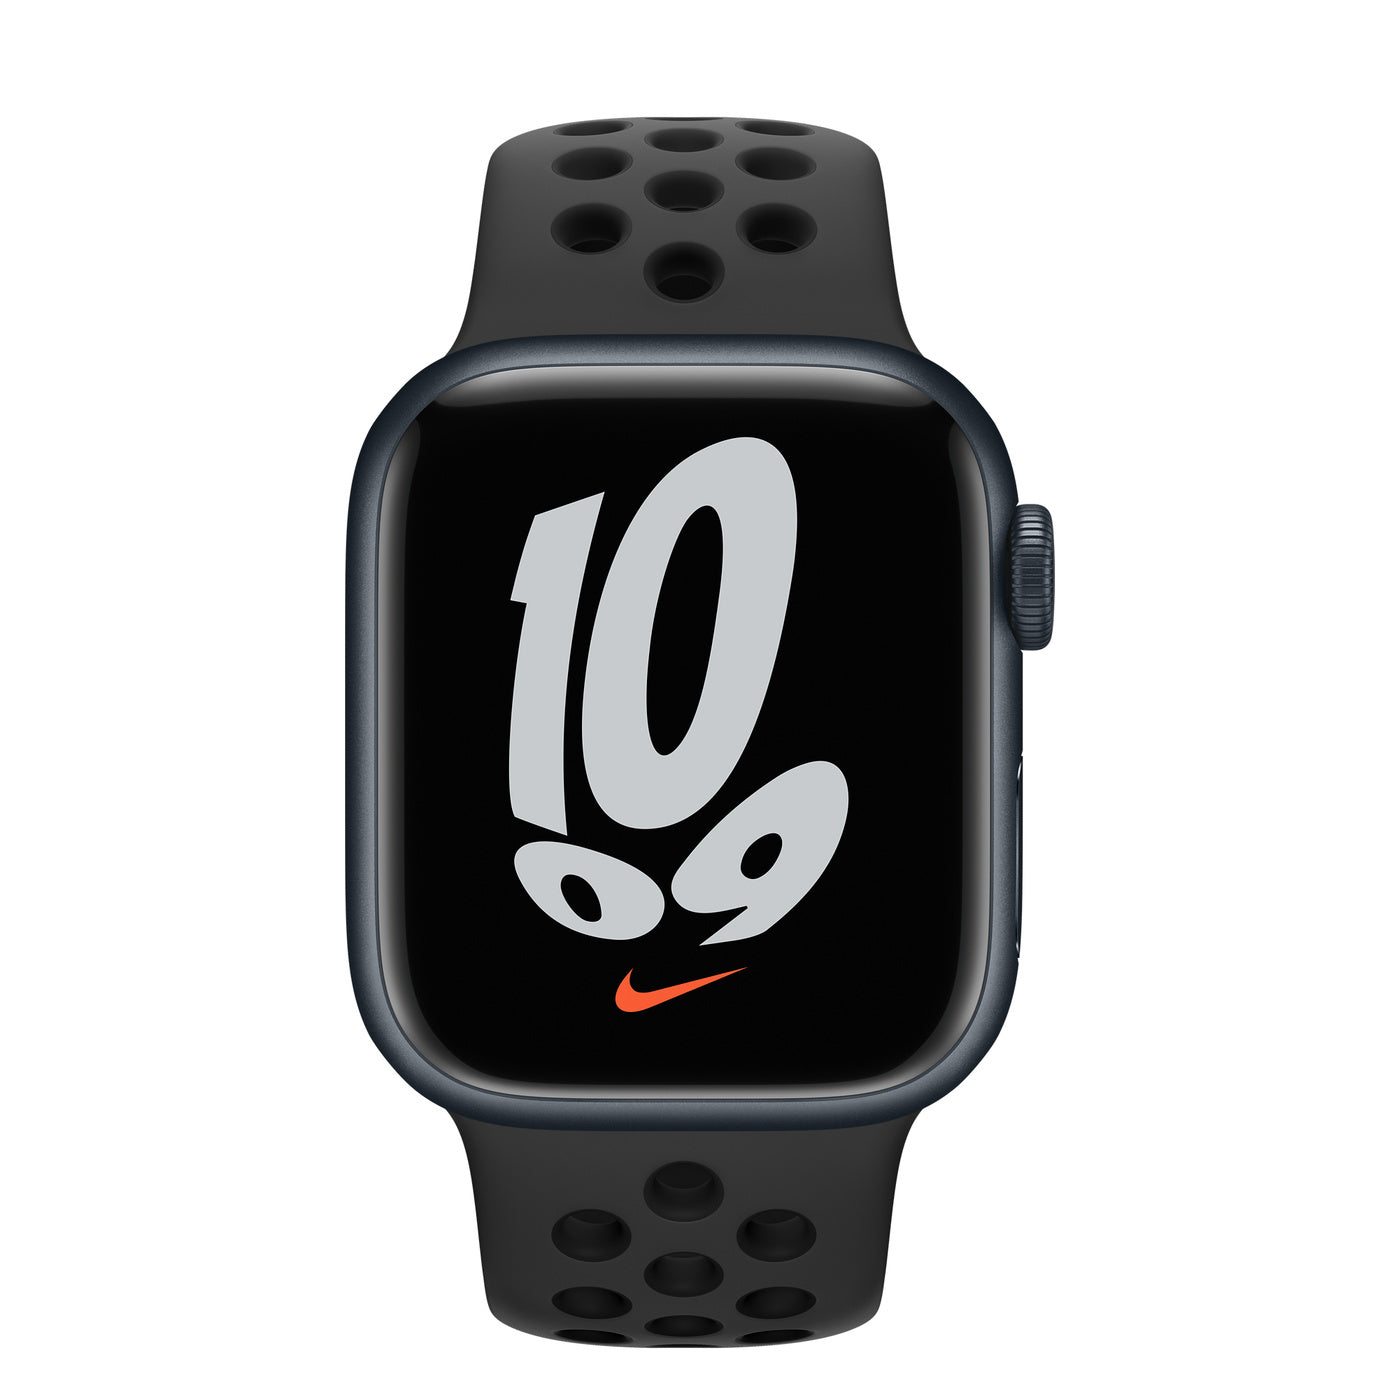 Apple Watch Series 7 Midnight Aluminum Case with Nike Sport Band